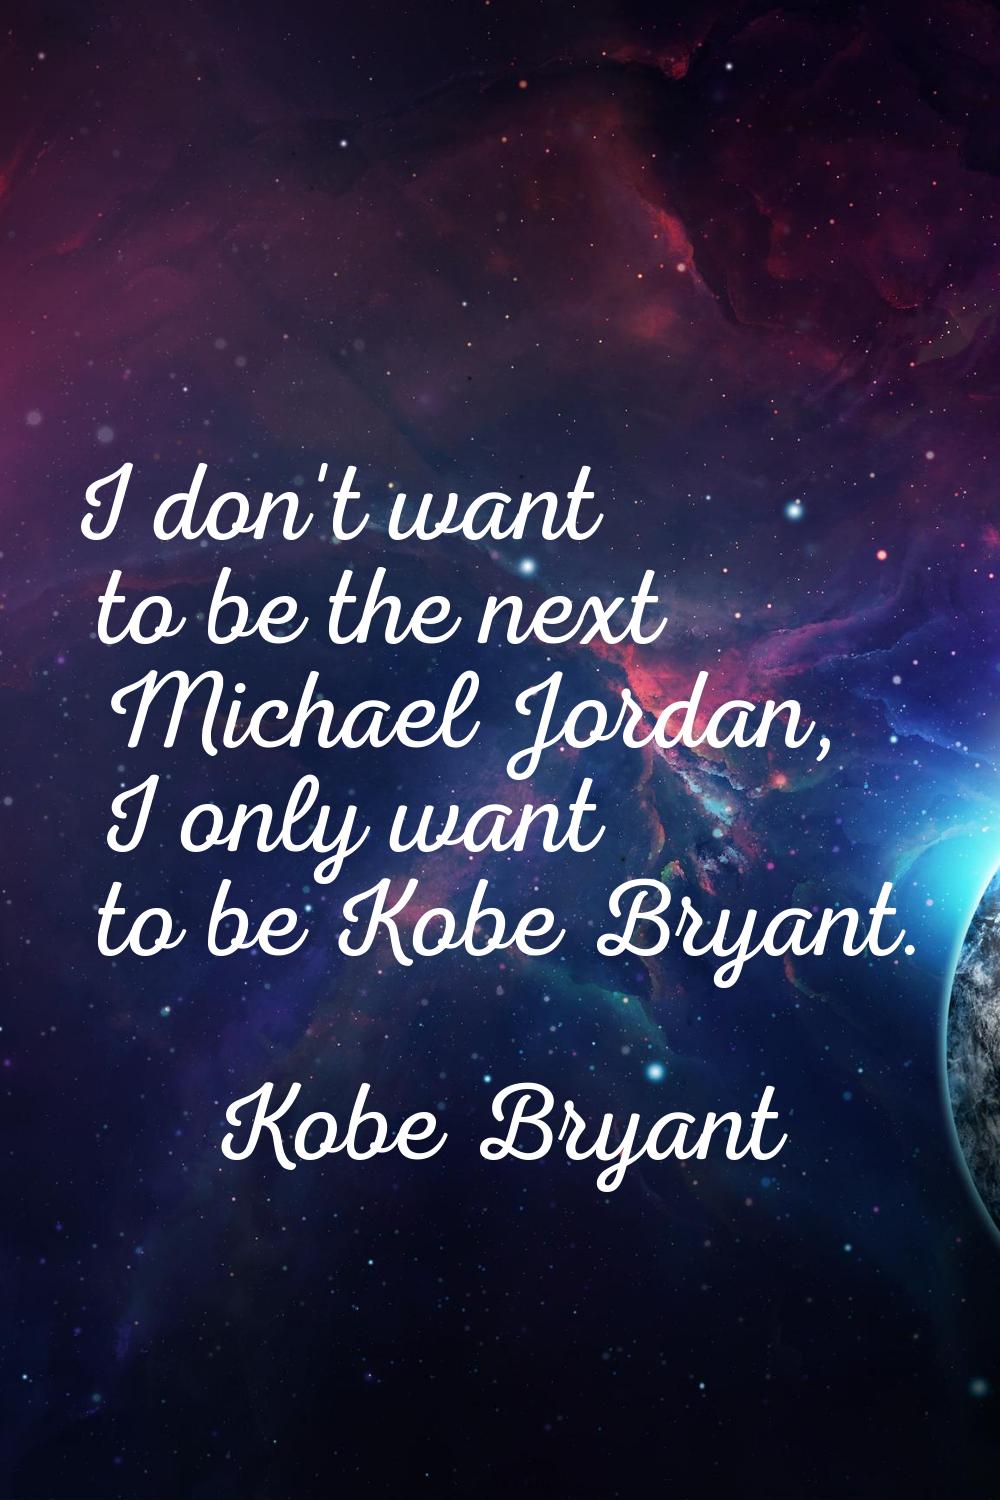 I don't want to be the next Michael Jordan, I only want to be Kobe Bryant.